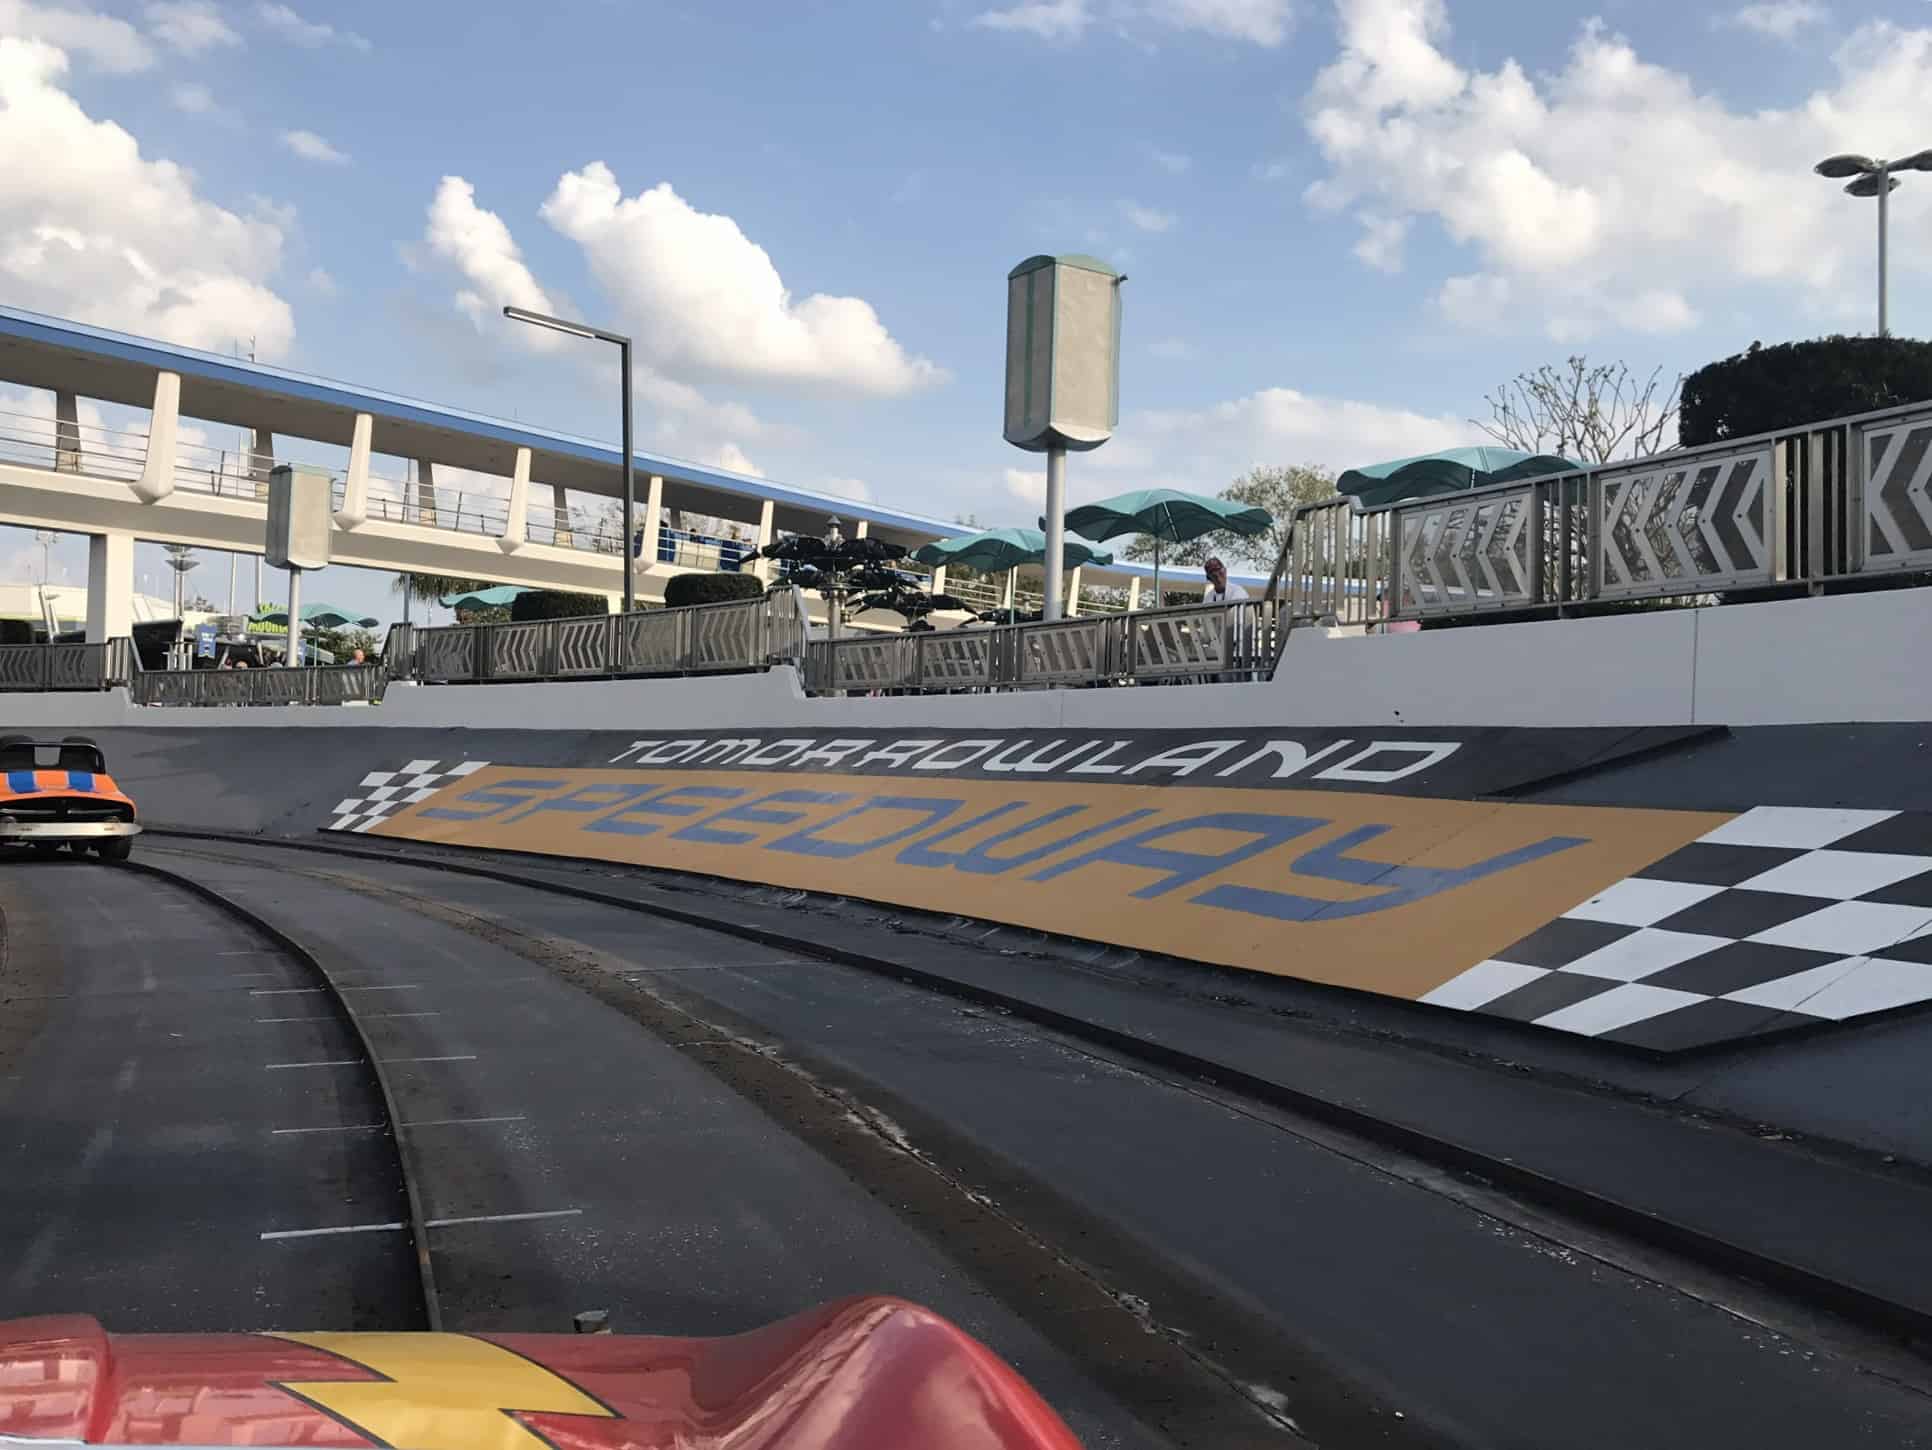 Tomorrowland Speedway Sign and track